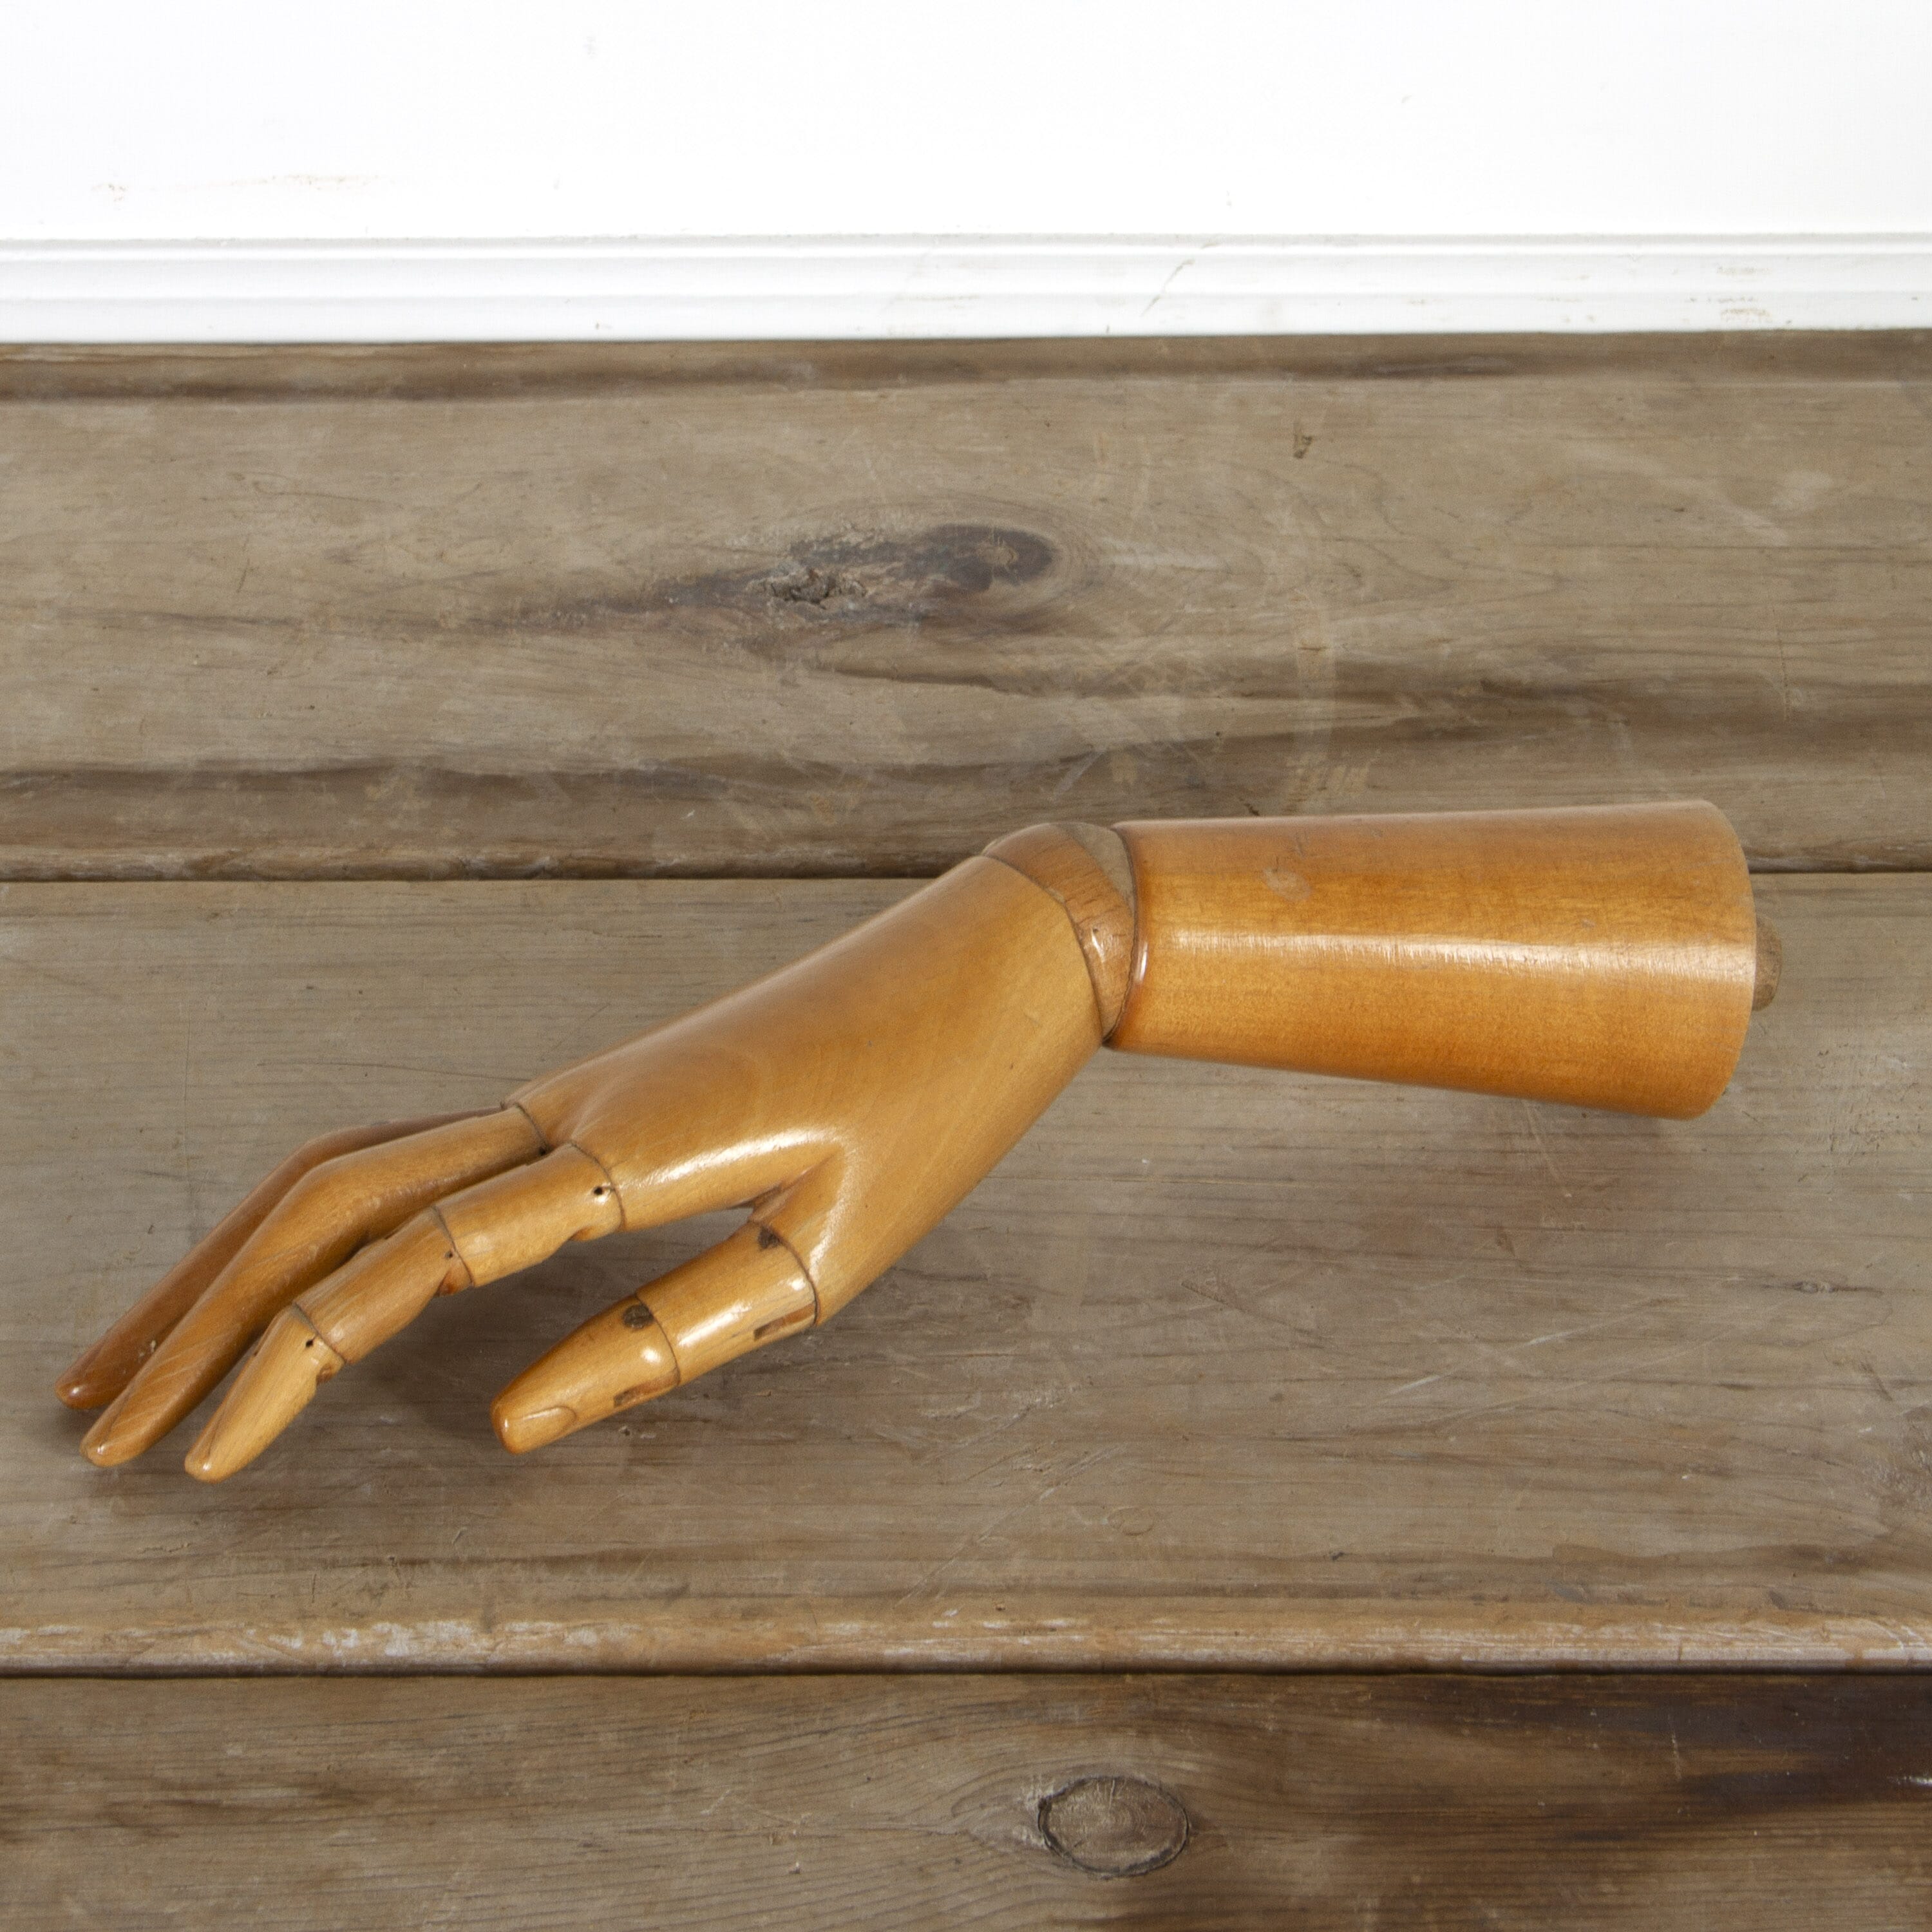 French Wooden Articulated Mannequin Hand